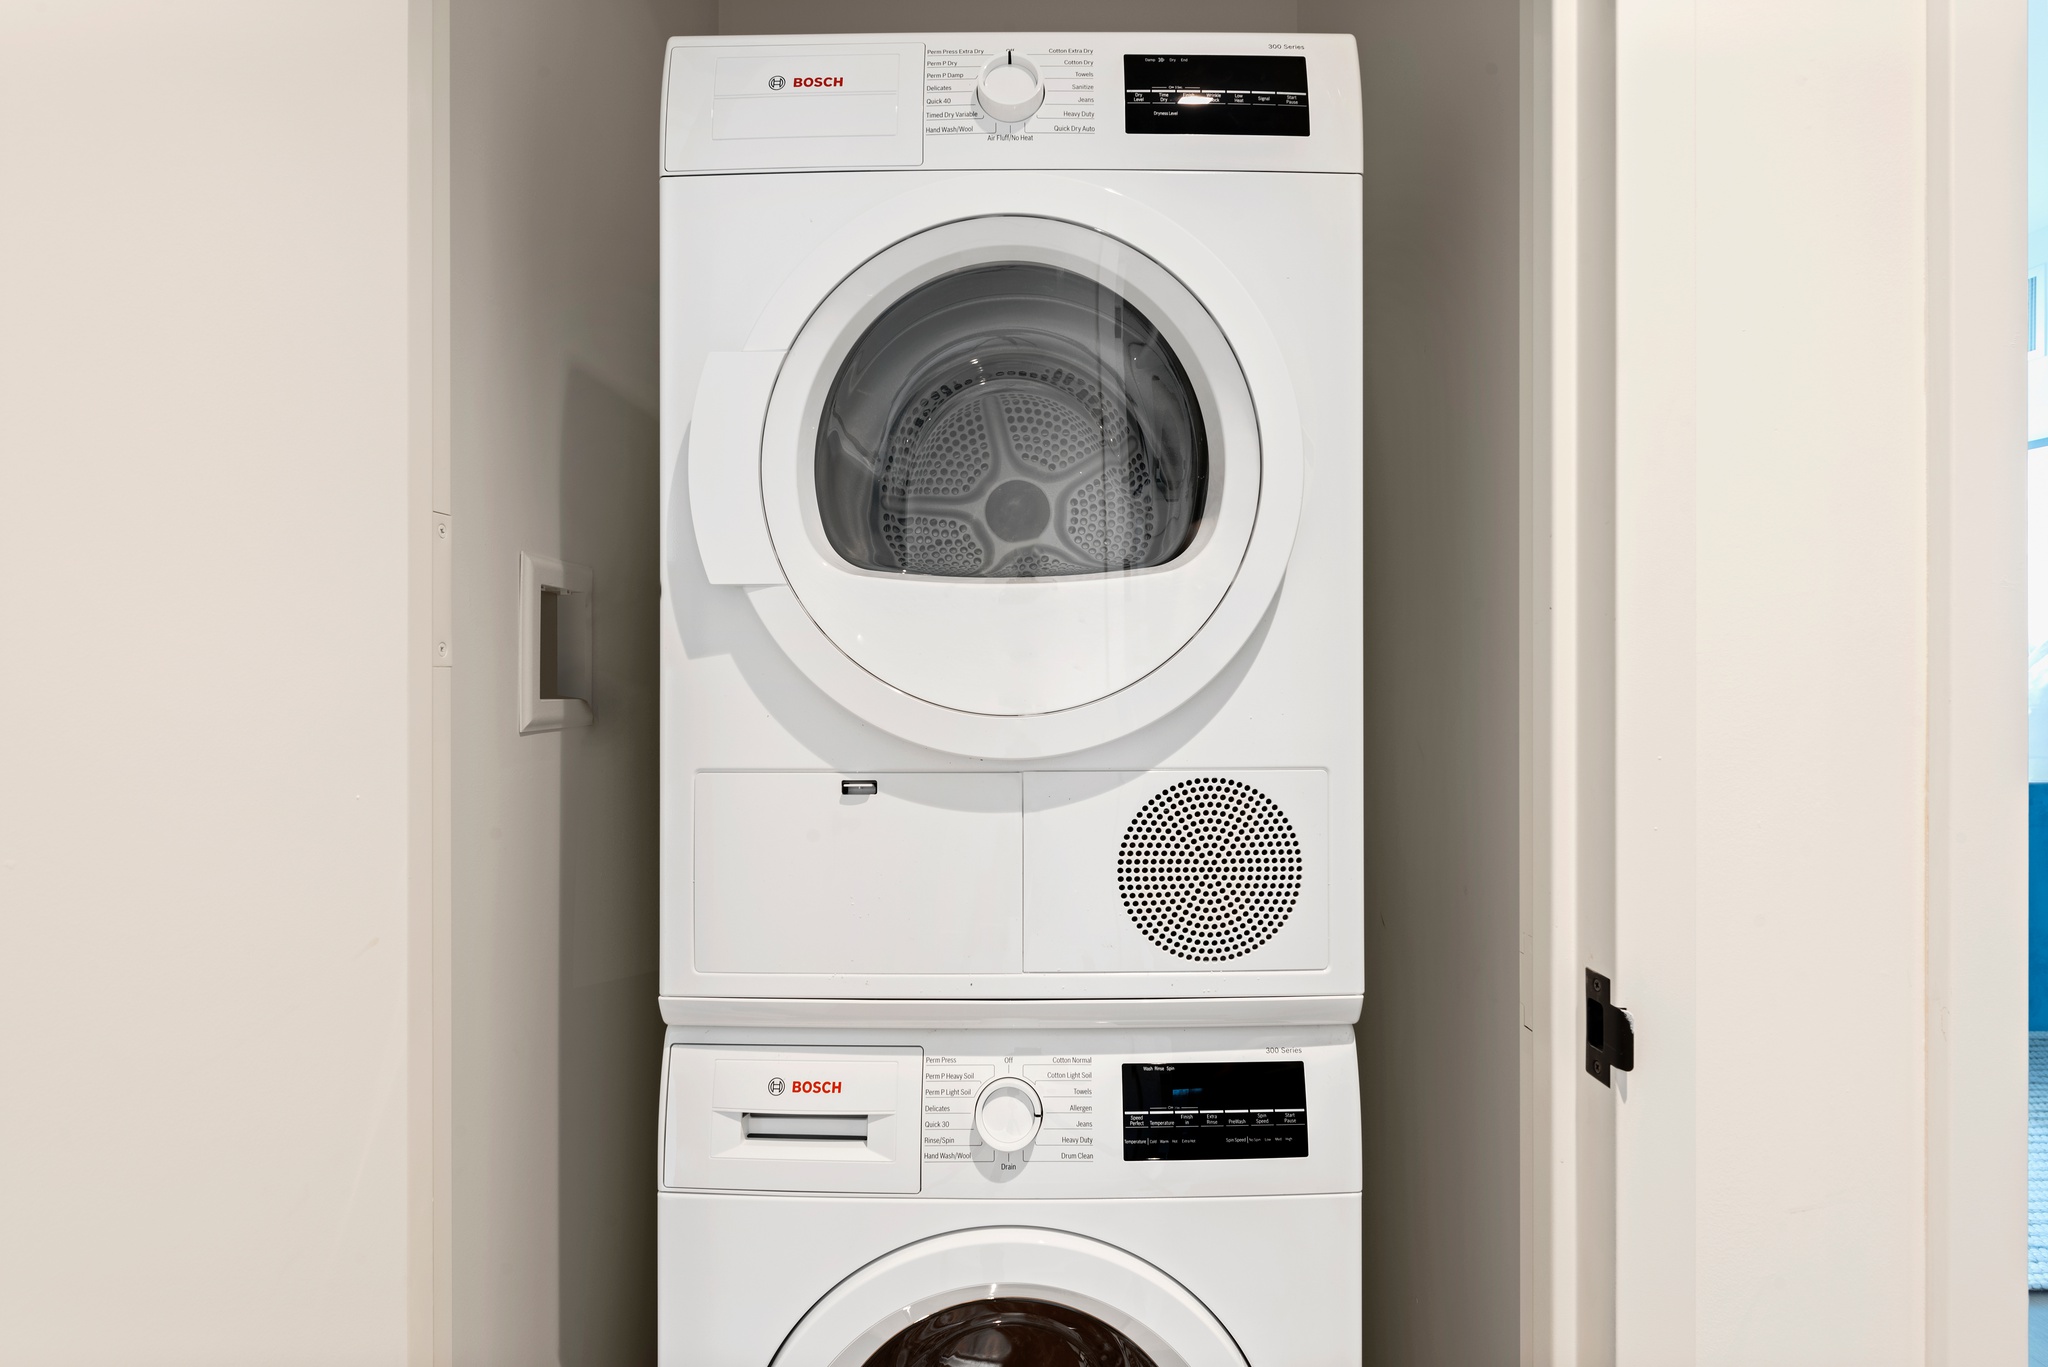 Bosch vertically stacked washer and dryer in white